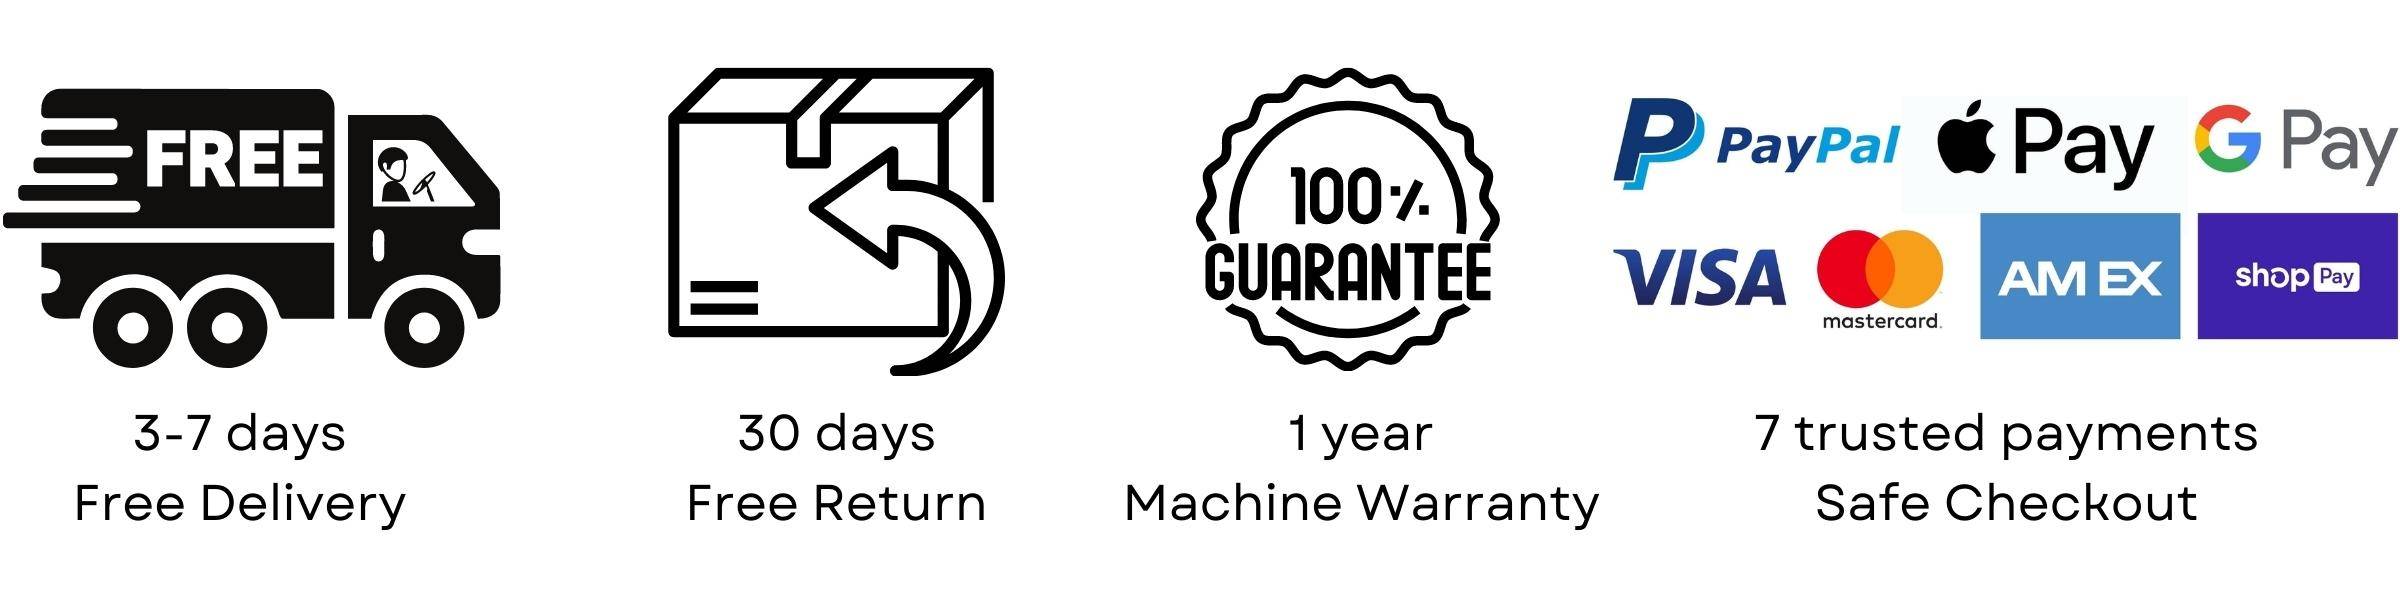 Free shipping in the United States 30-day return, 36-month machine, 7-year cutter warranty Guaranteed safe checkout with Paypal and other trusted payments Specialized in manufacturing paper shredders since 2005